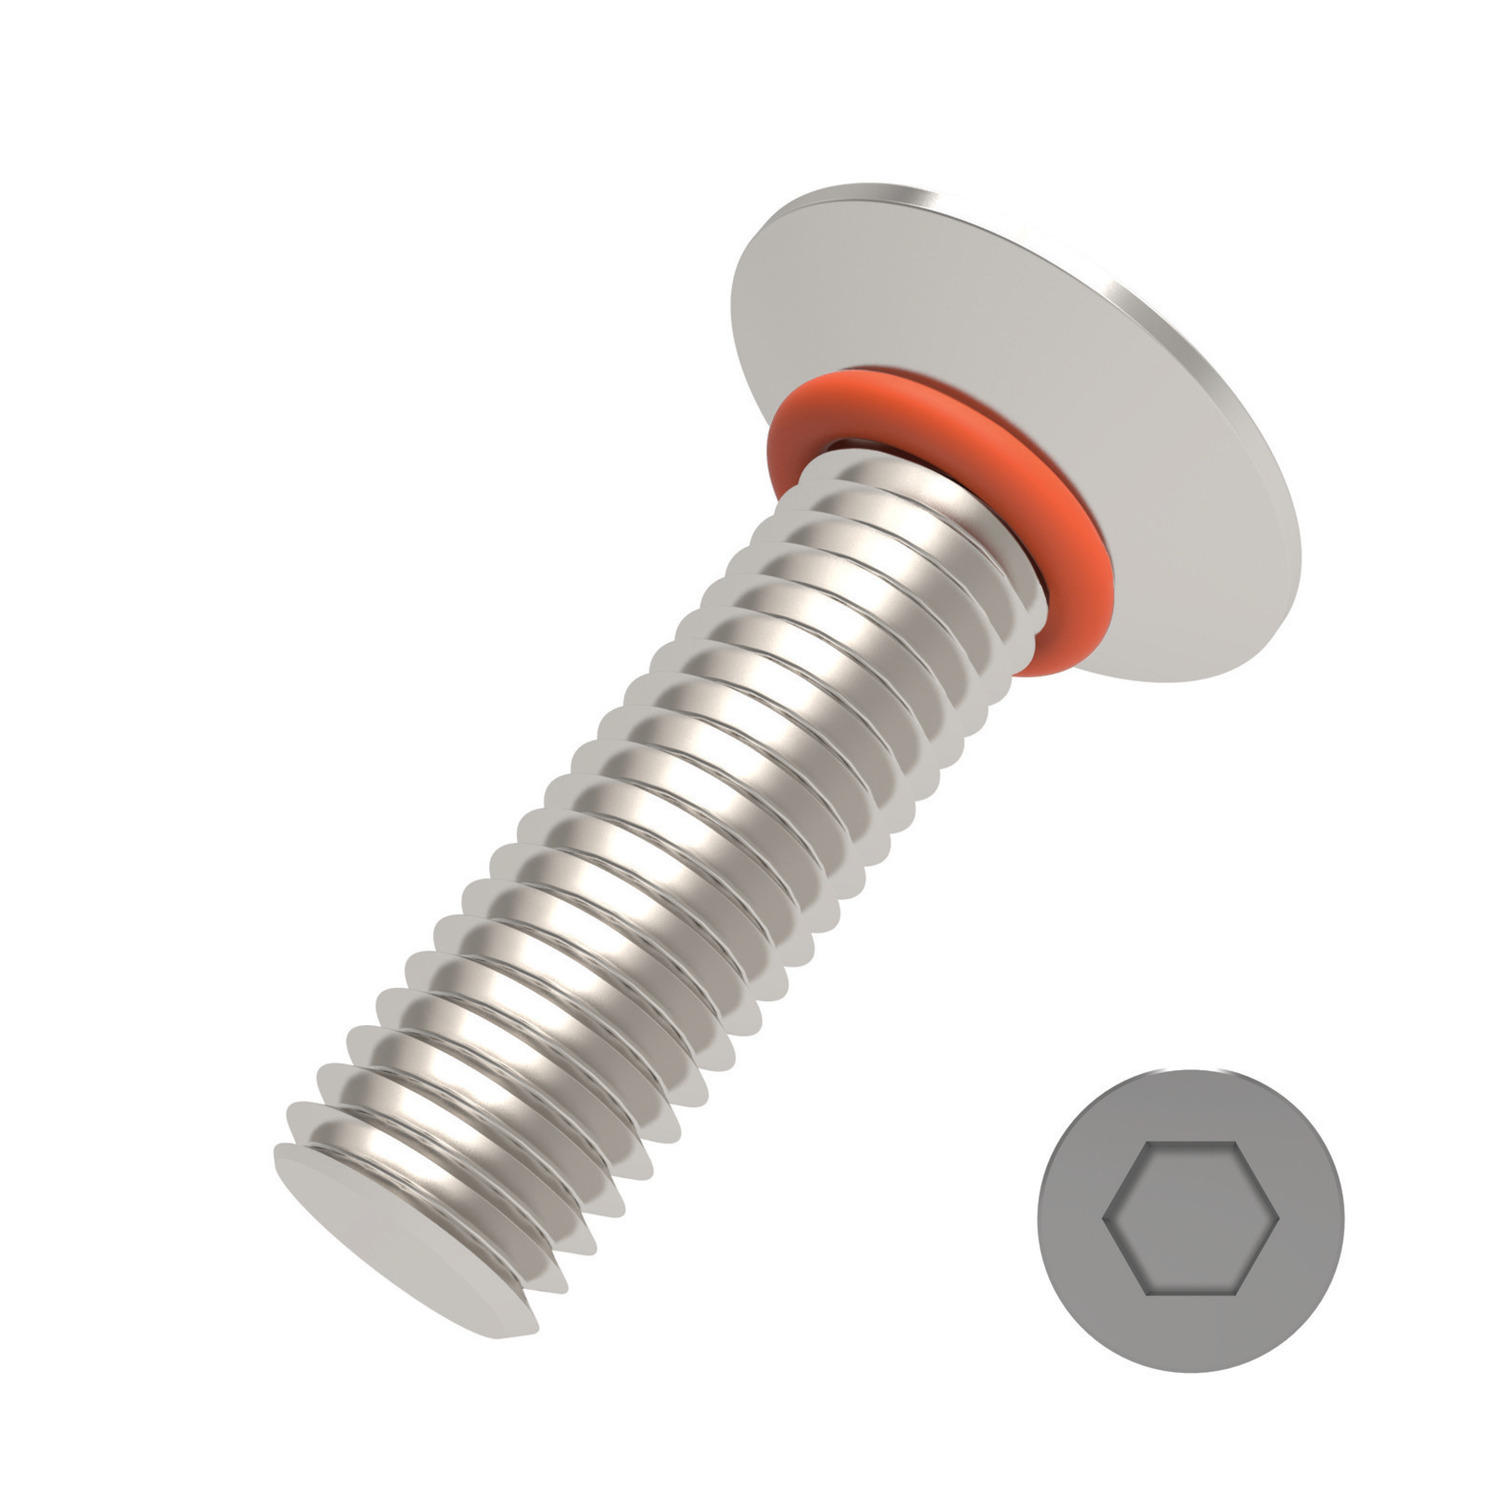 Countersunk Seal Screws Countersunk seal screws are manufactured to DIN 7991